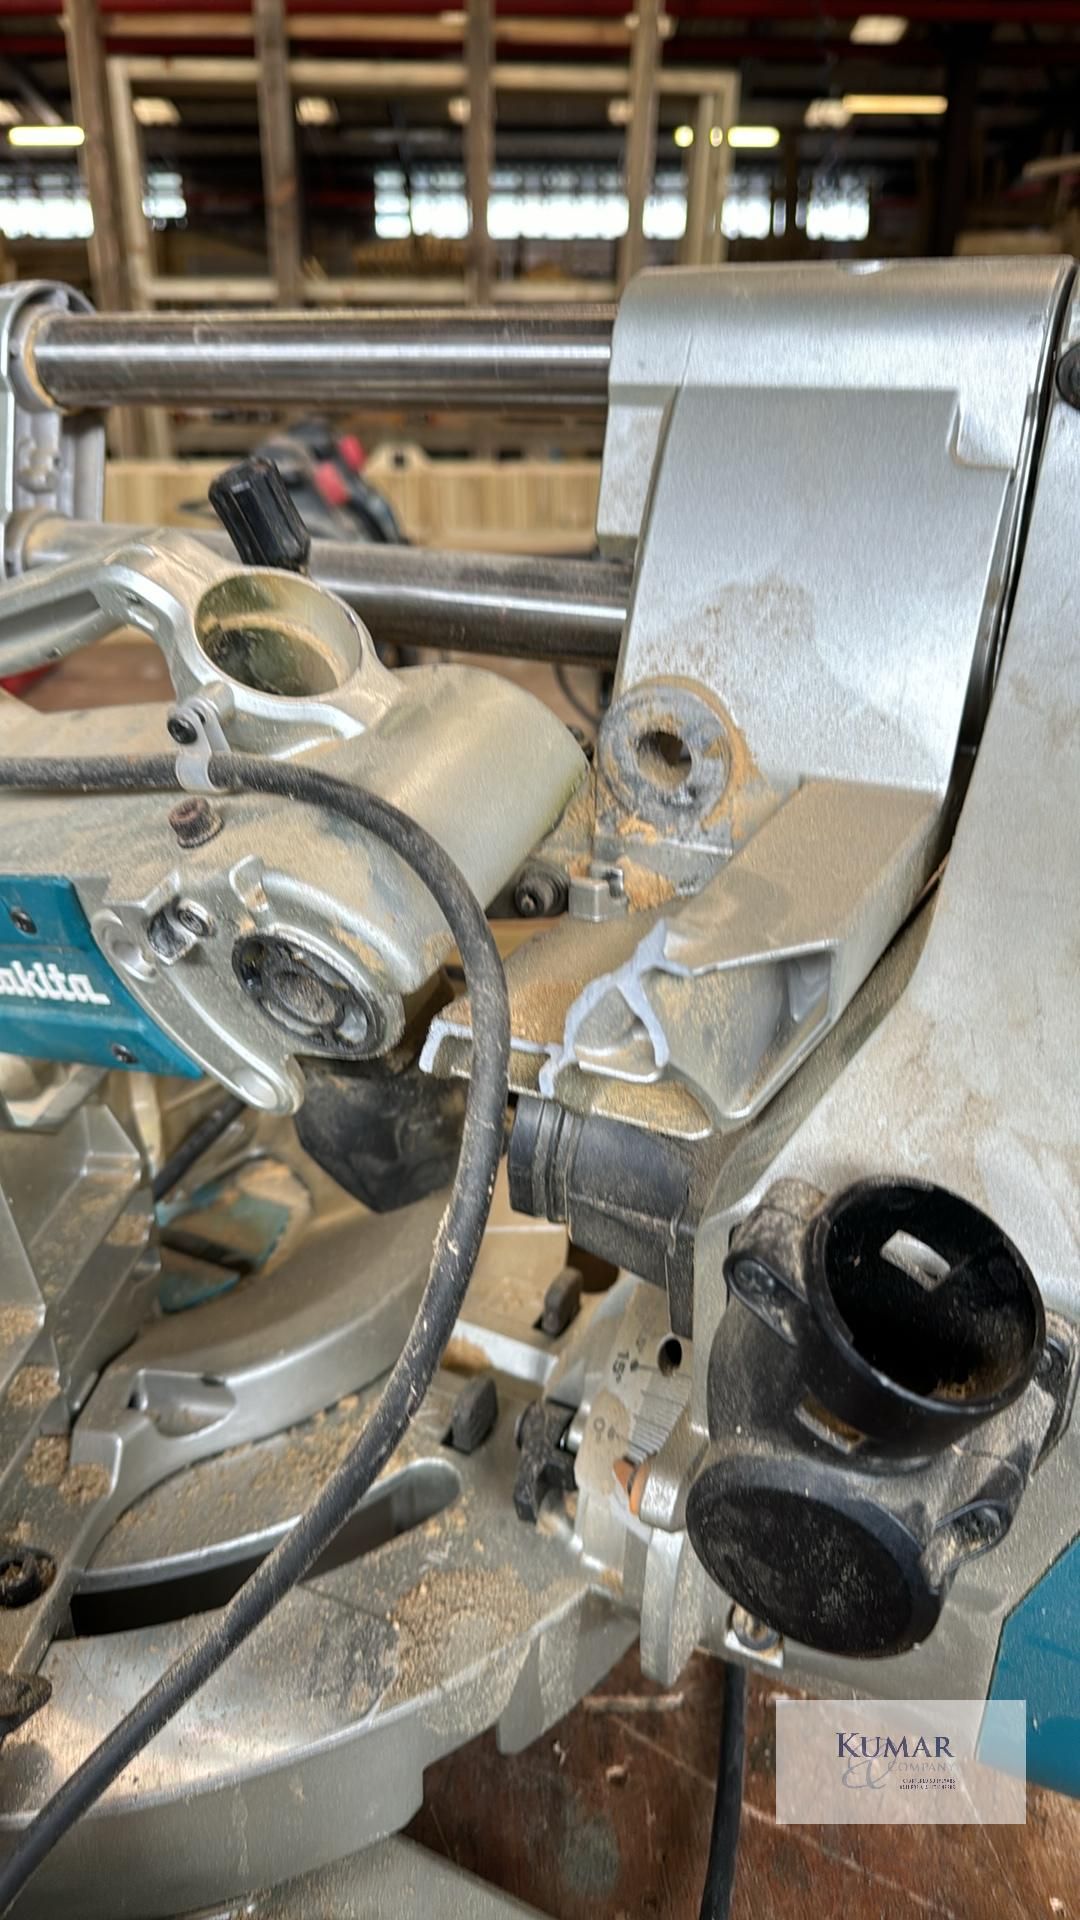 Makita LS1219 305mm Slide Compound Mitre Saw, Serial No.1176G, (06/2018) - Sold for Spares or - Image 3 of 8